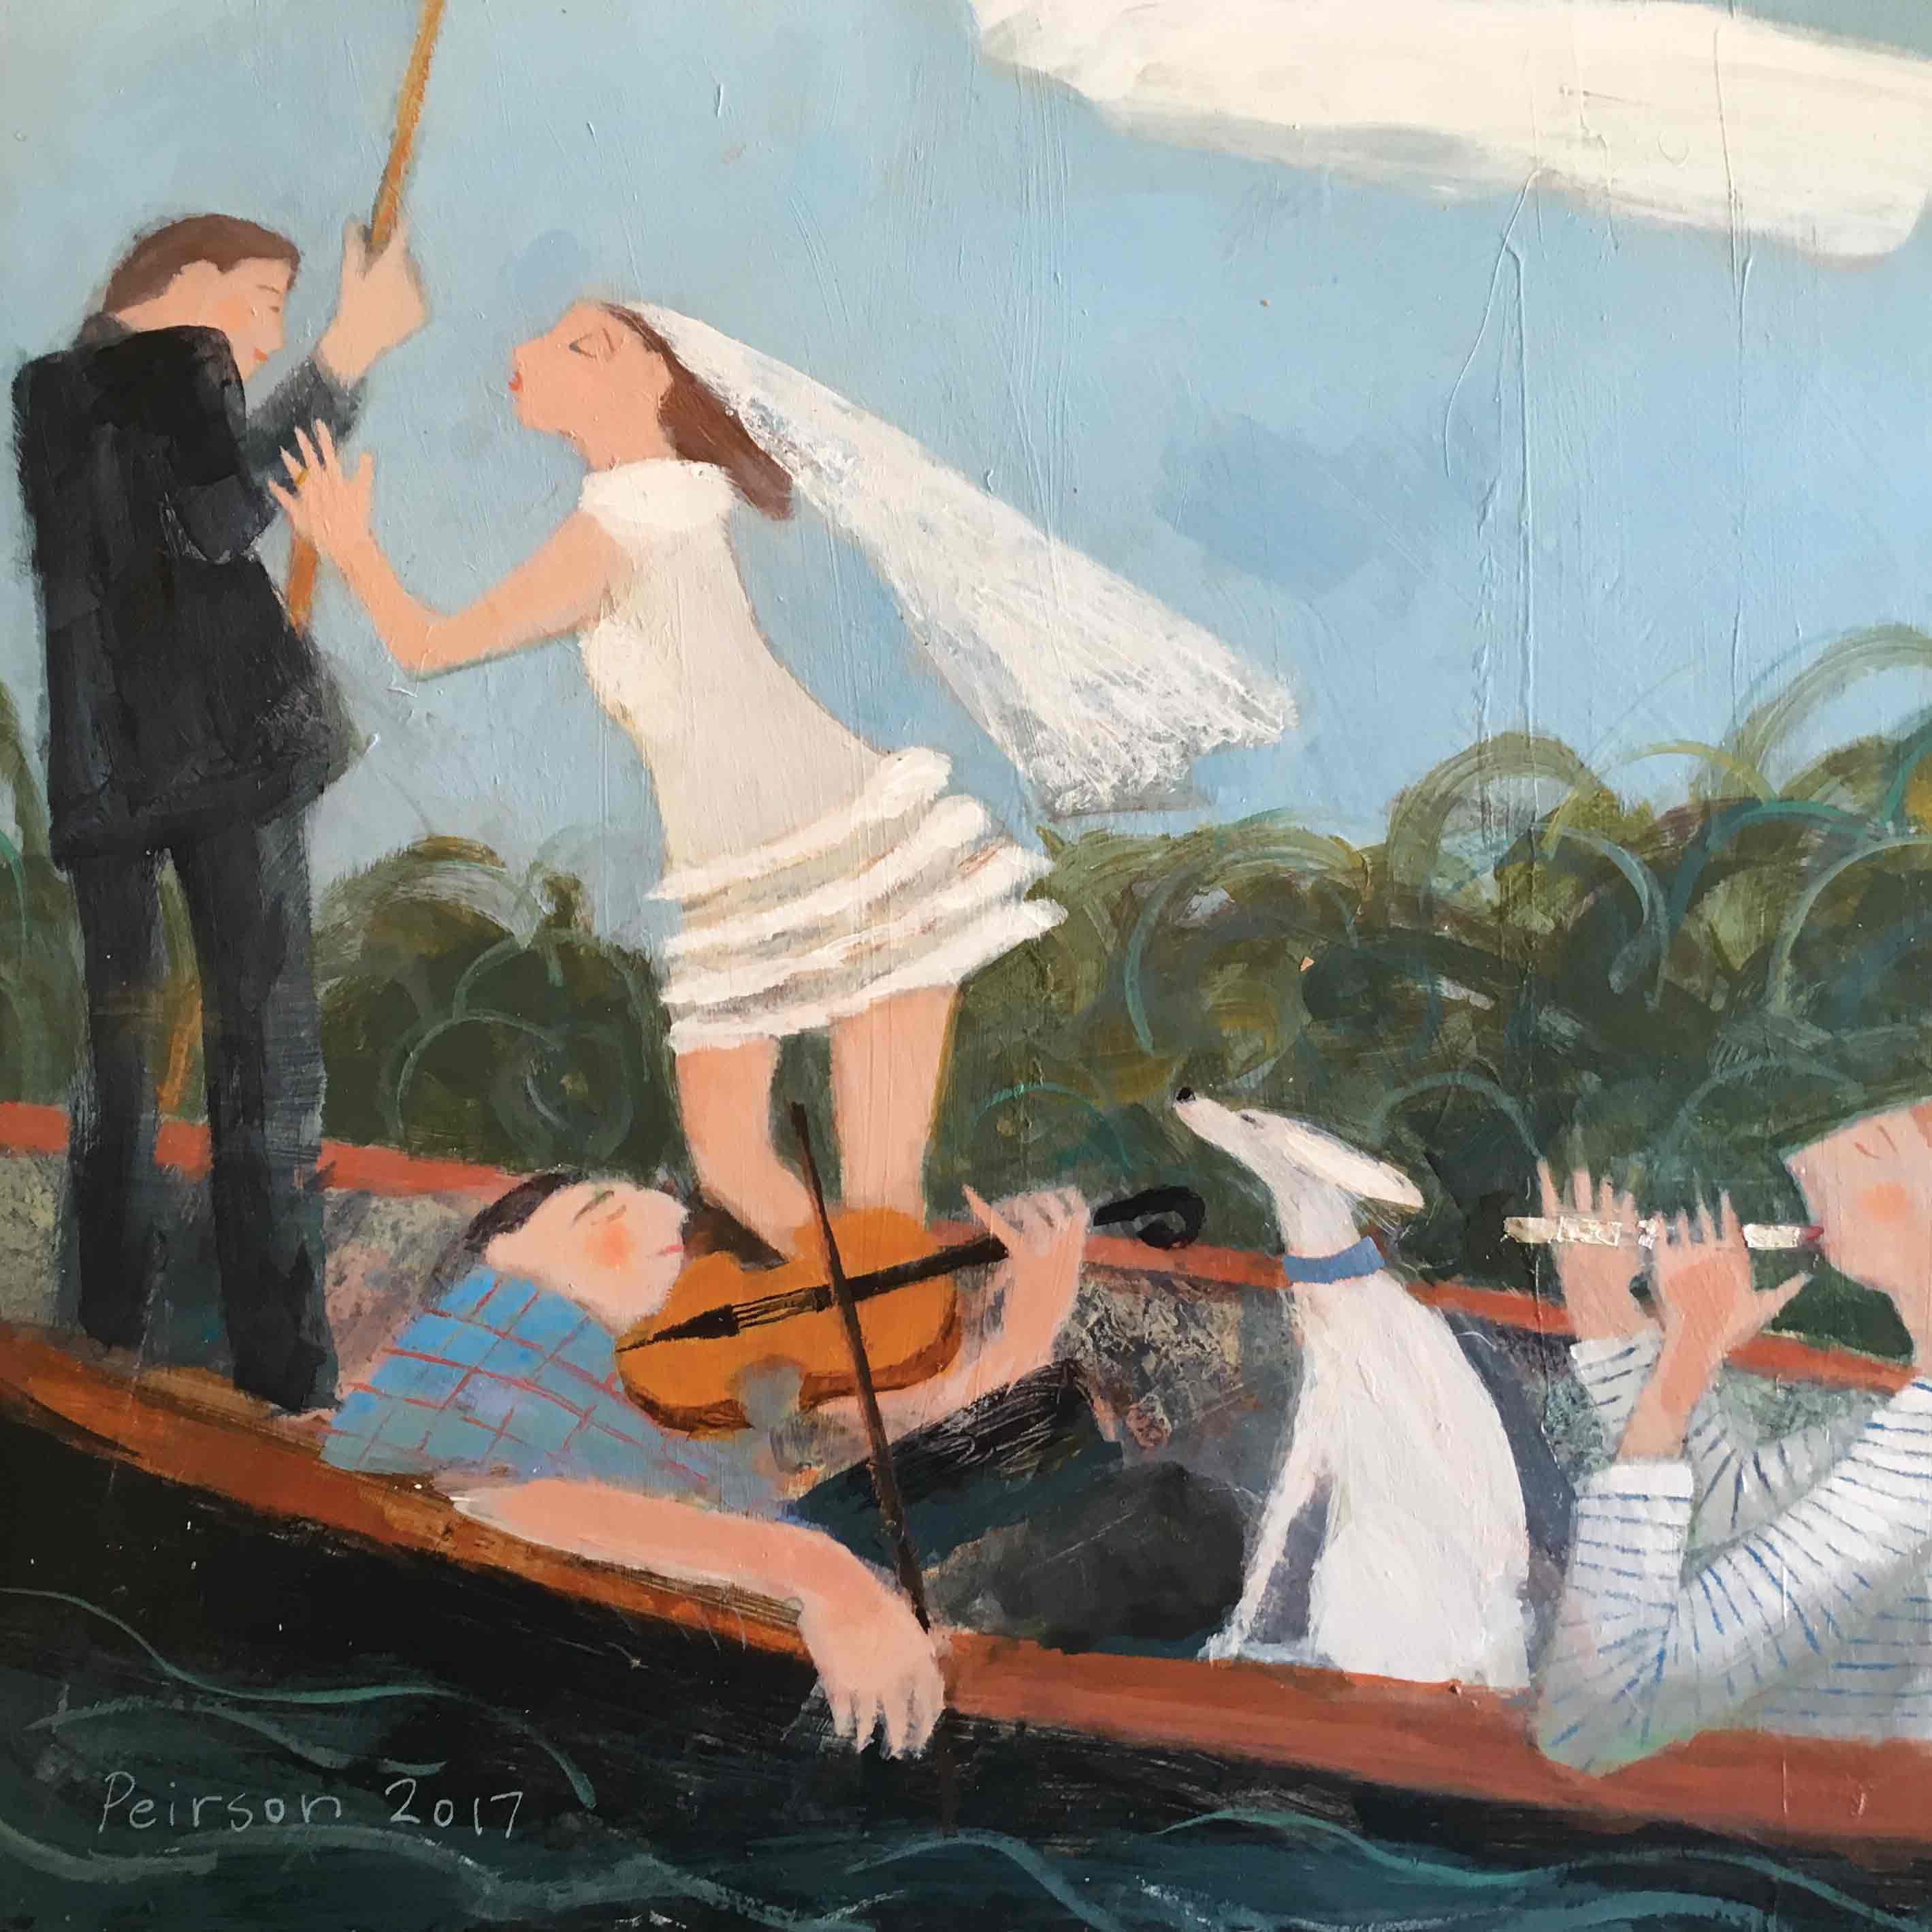 Fine Art Greeting Card by Barbara Peirson, Acrylic on Board, Wedding couple and musicians punting